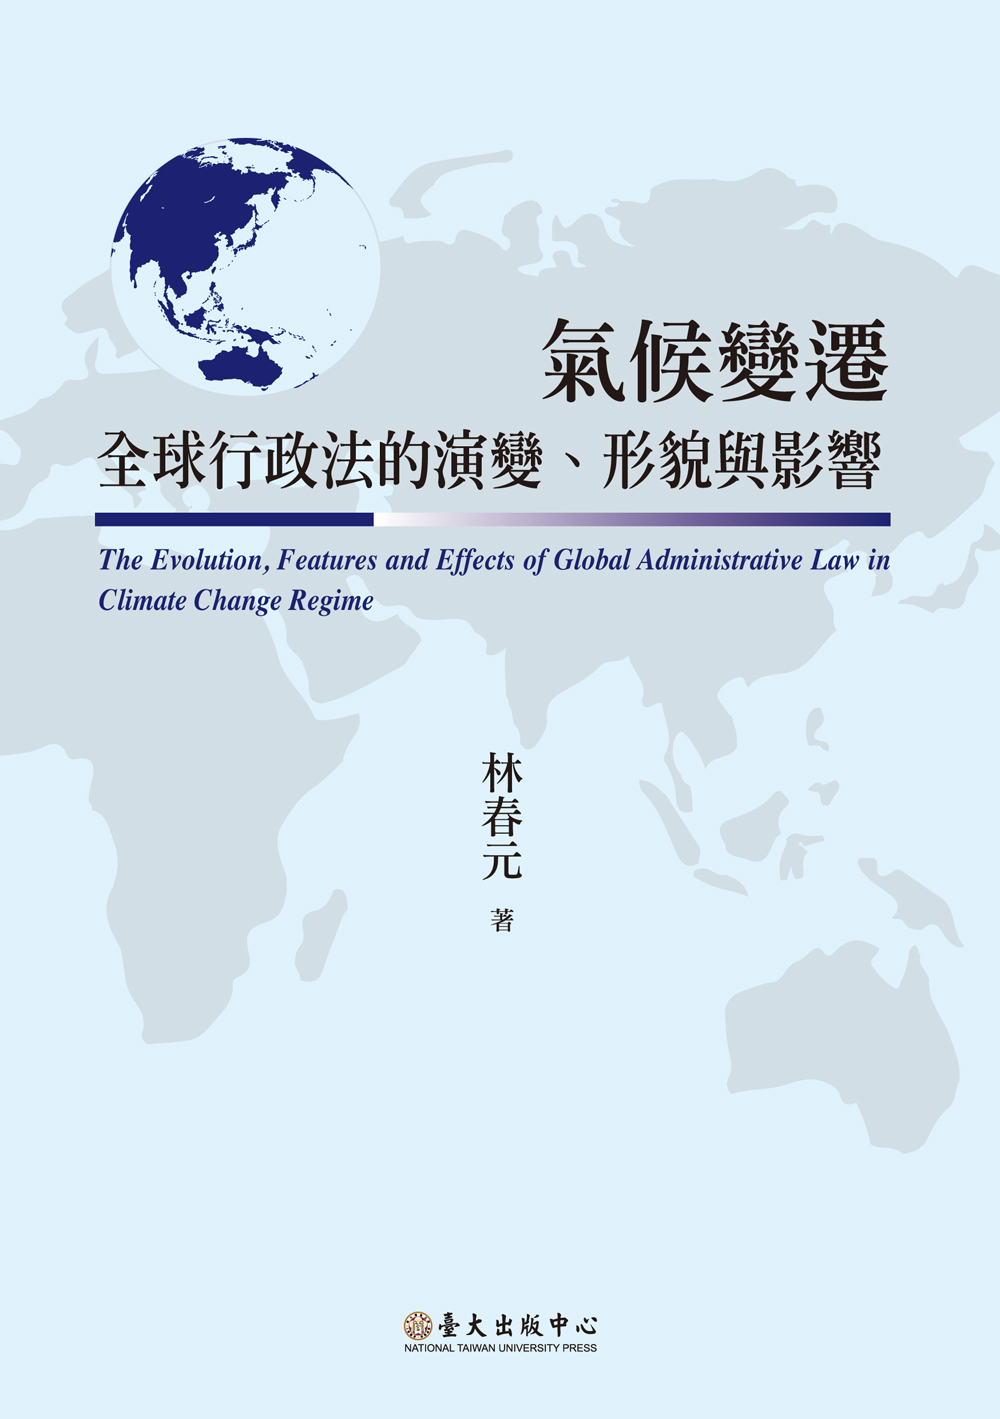 The Evolution, Features and Effects of Global Administrative Law in Climate Change Regime